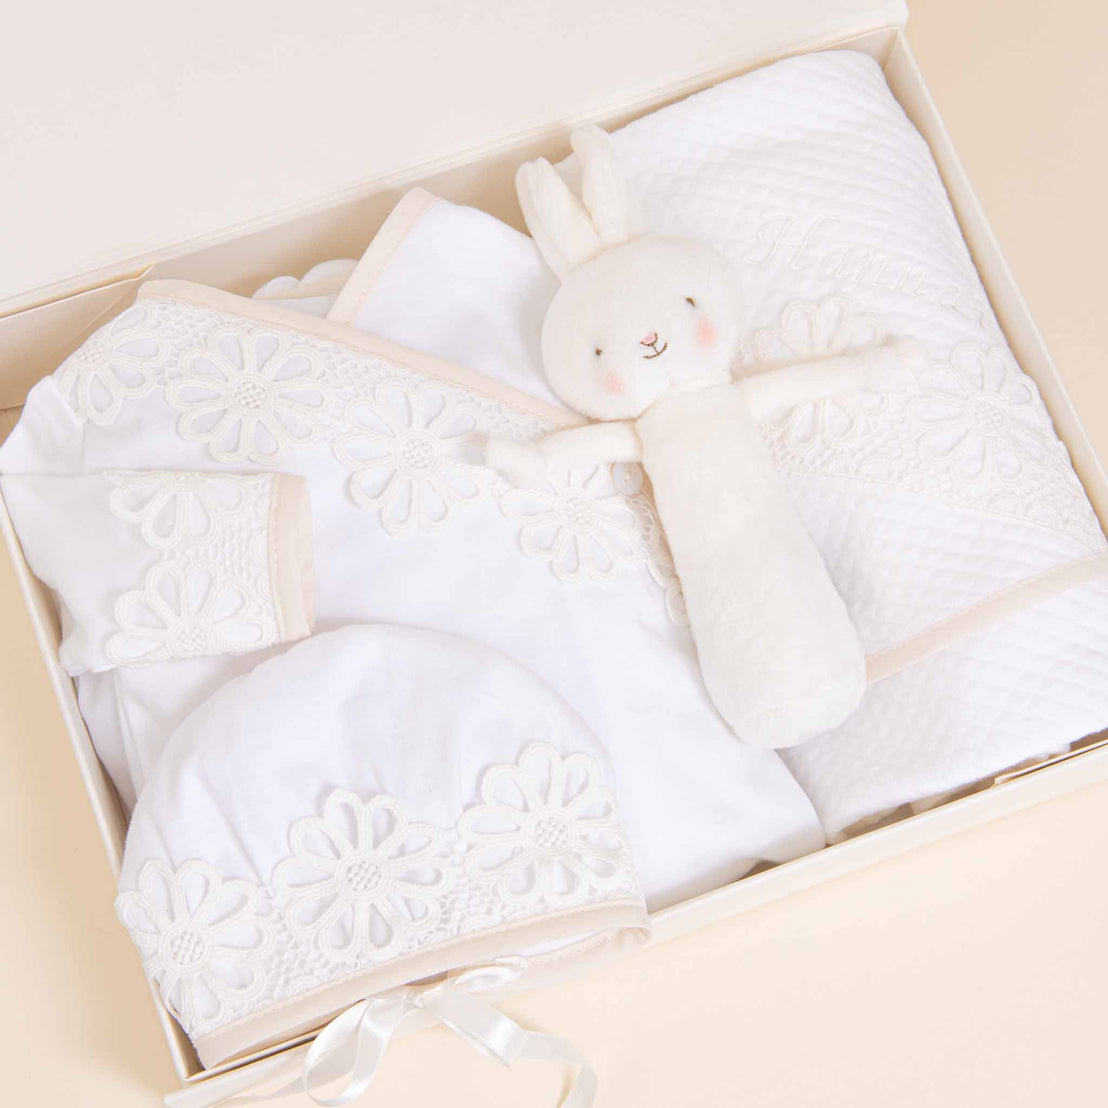 A Baby Beau & Belle Hannah Newborn Gift Set- Save 10% containing a plush bunny toy, a white blanket with floral embroidery, a coming home outfit, and a pair of booties, all neatly arranged on a soft background.